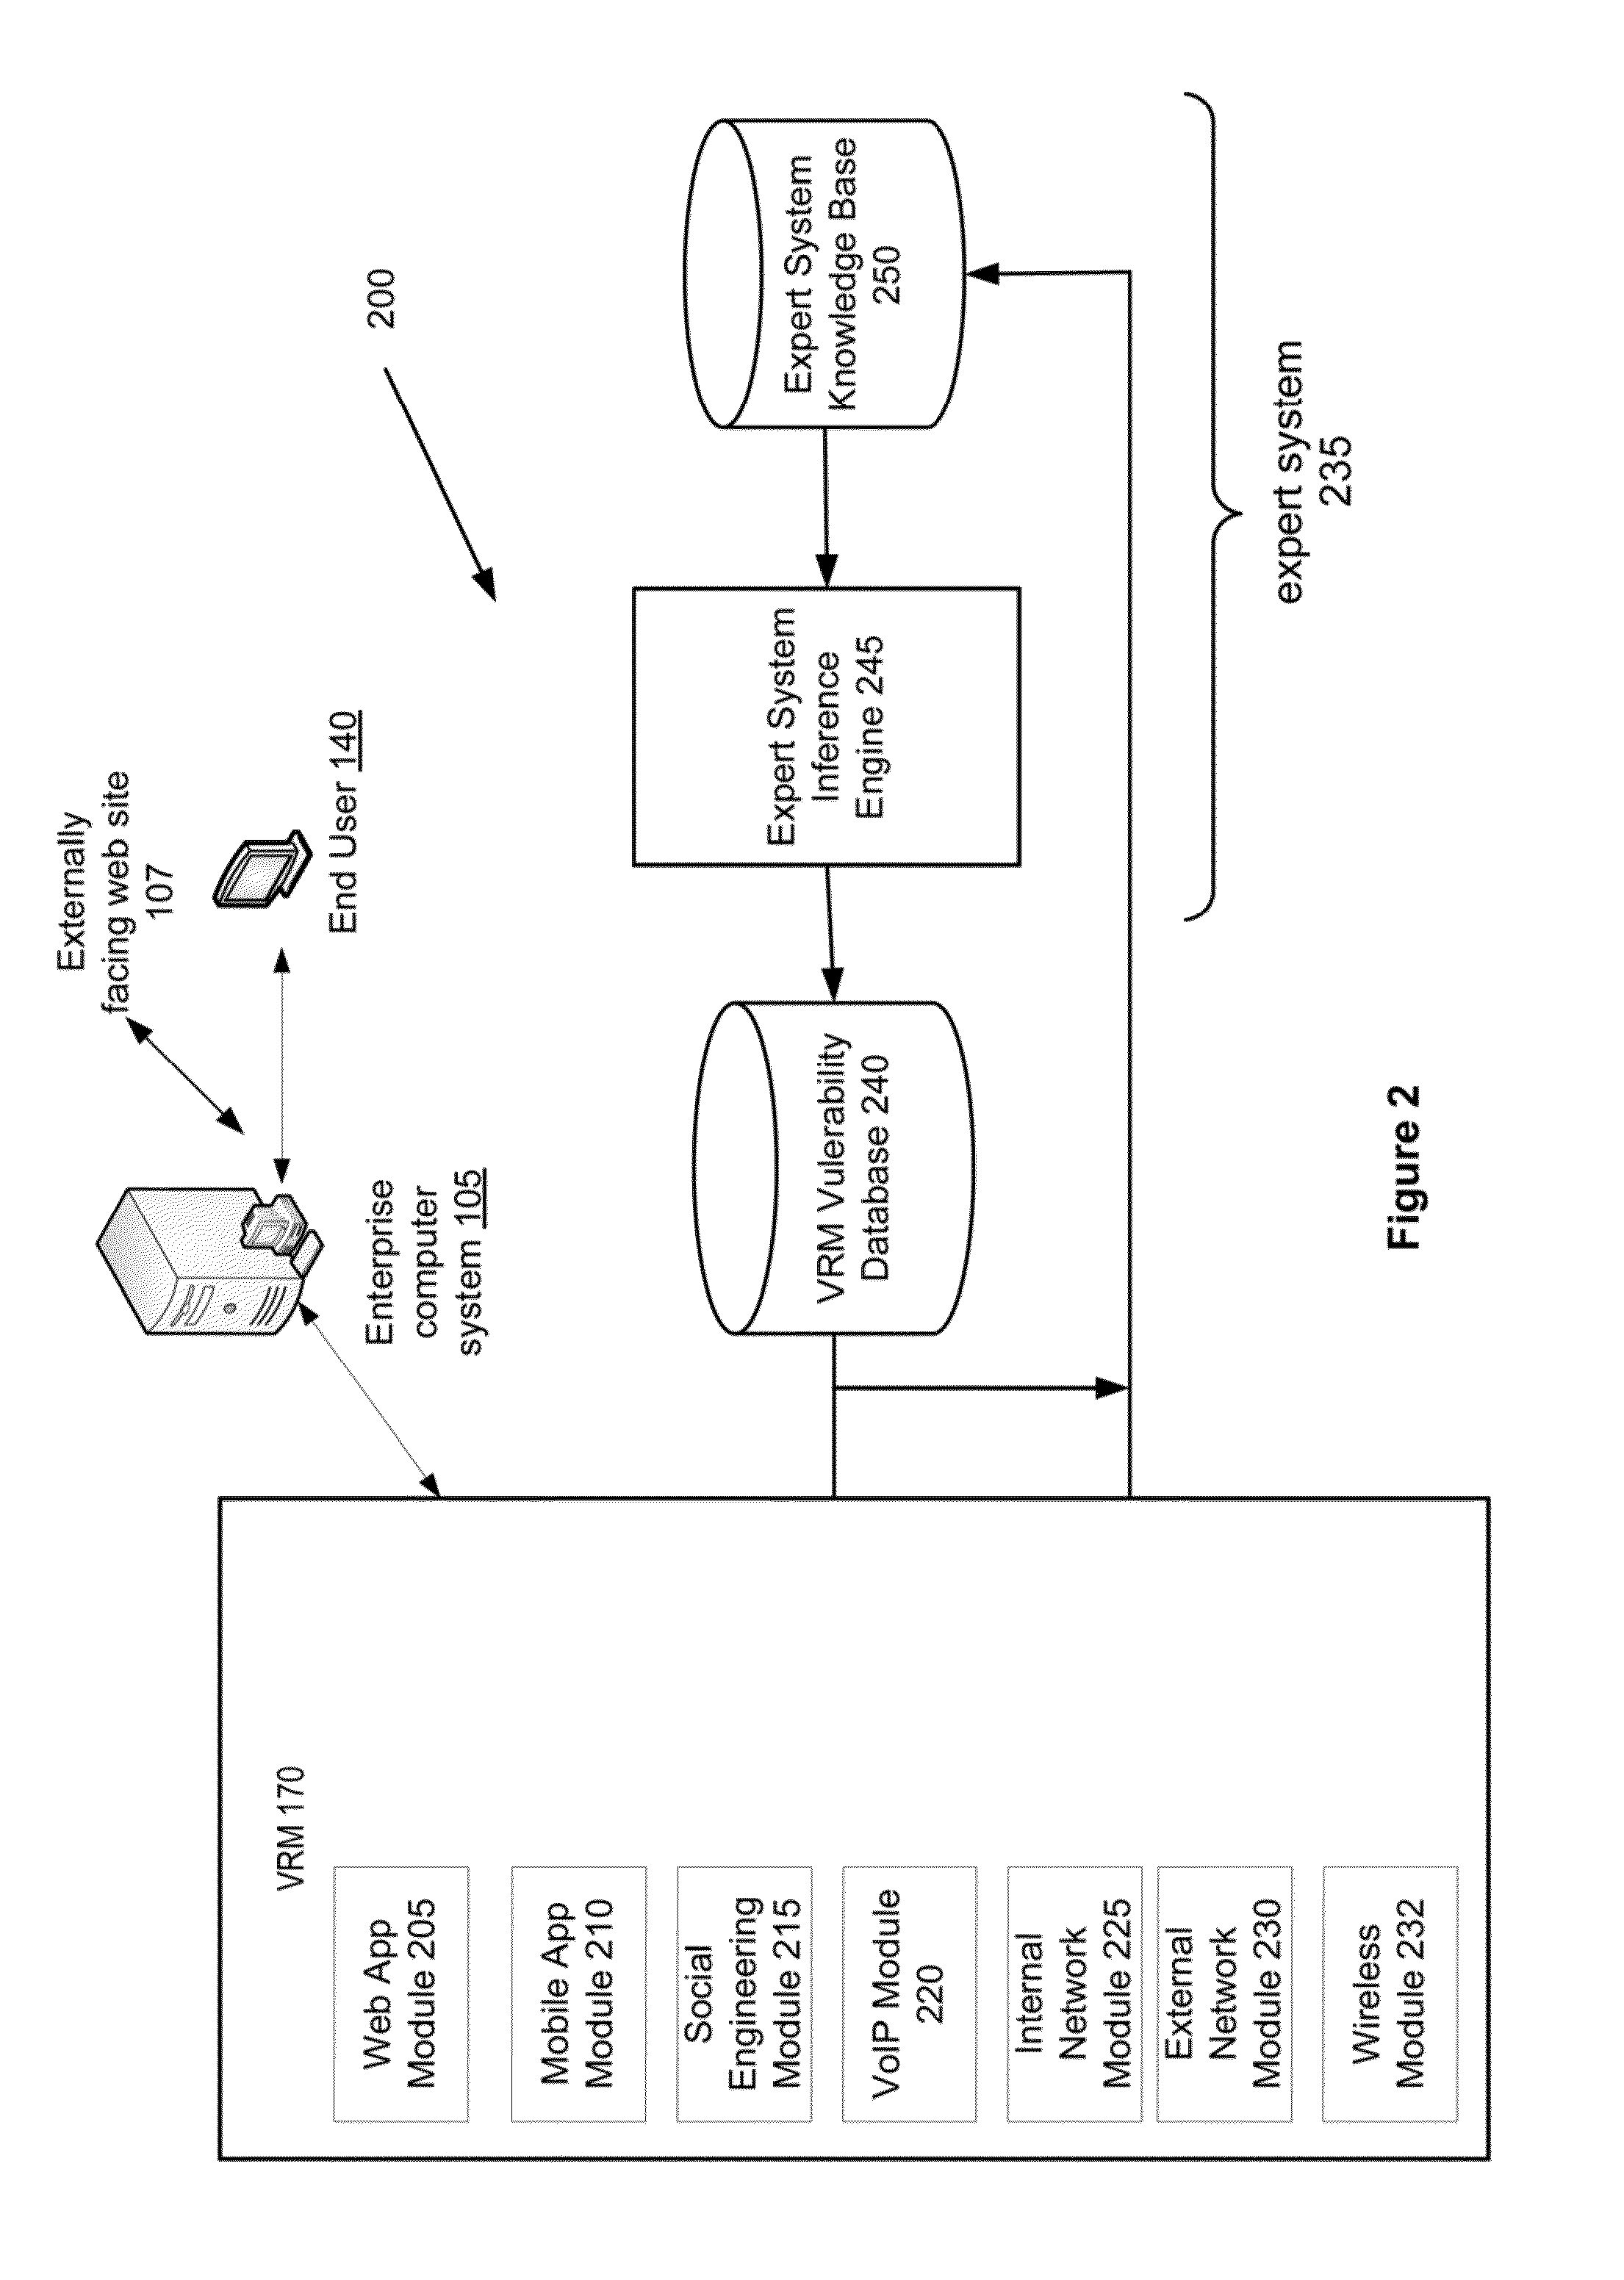 Method and System for Managing Computer System Vulnerabilities